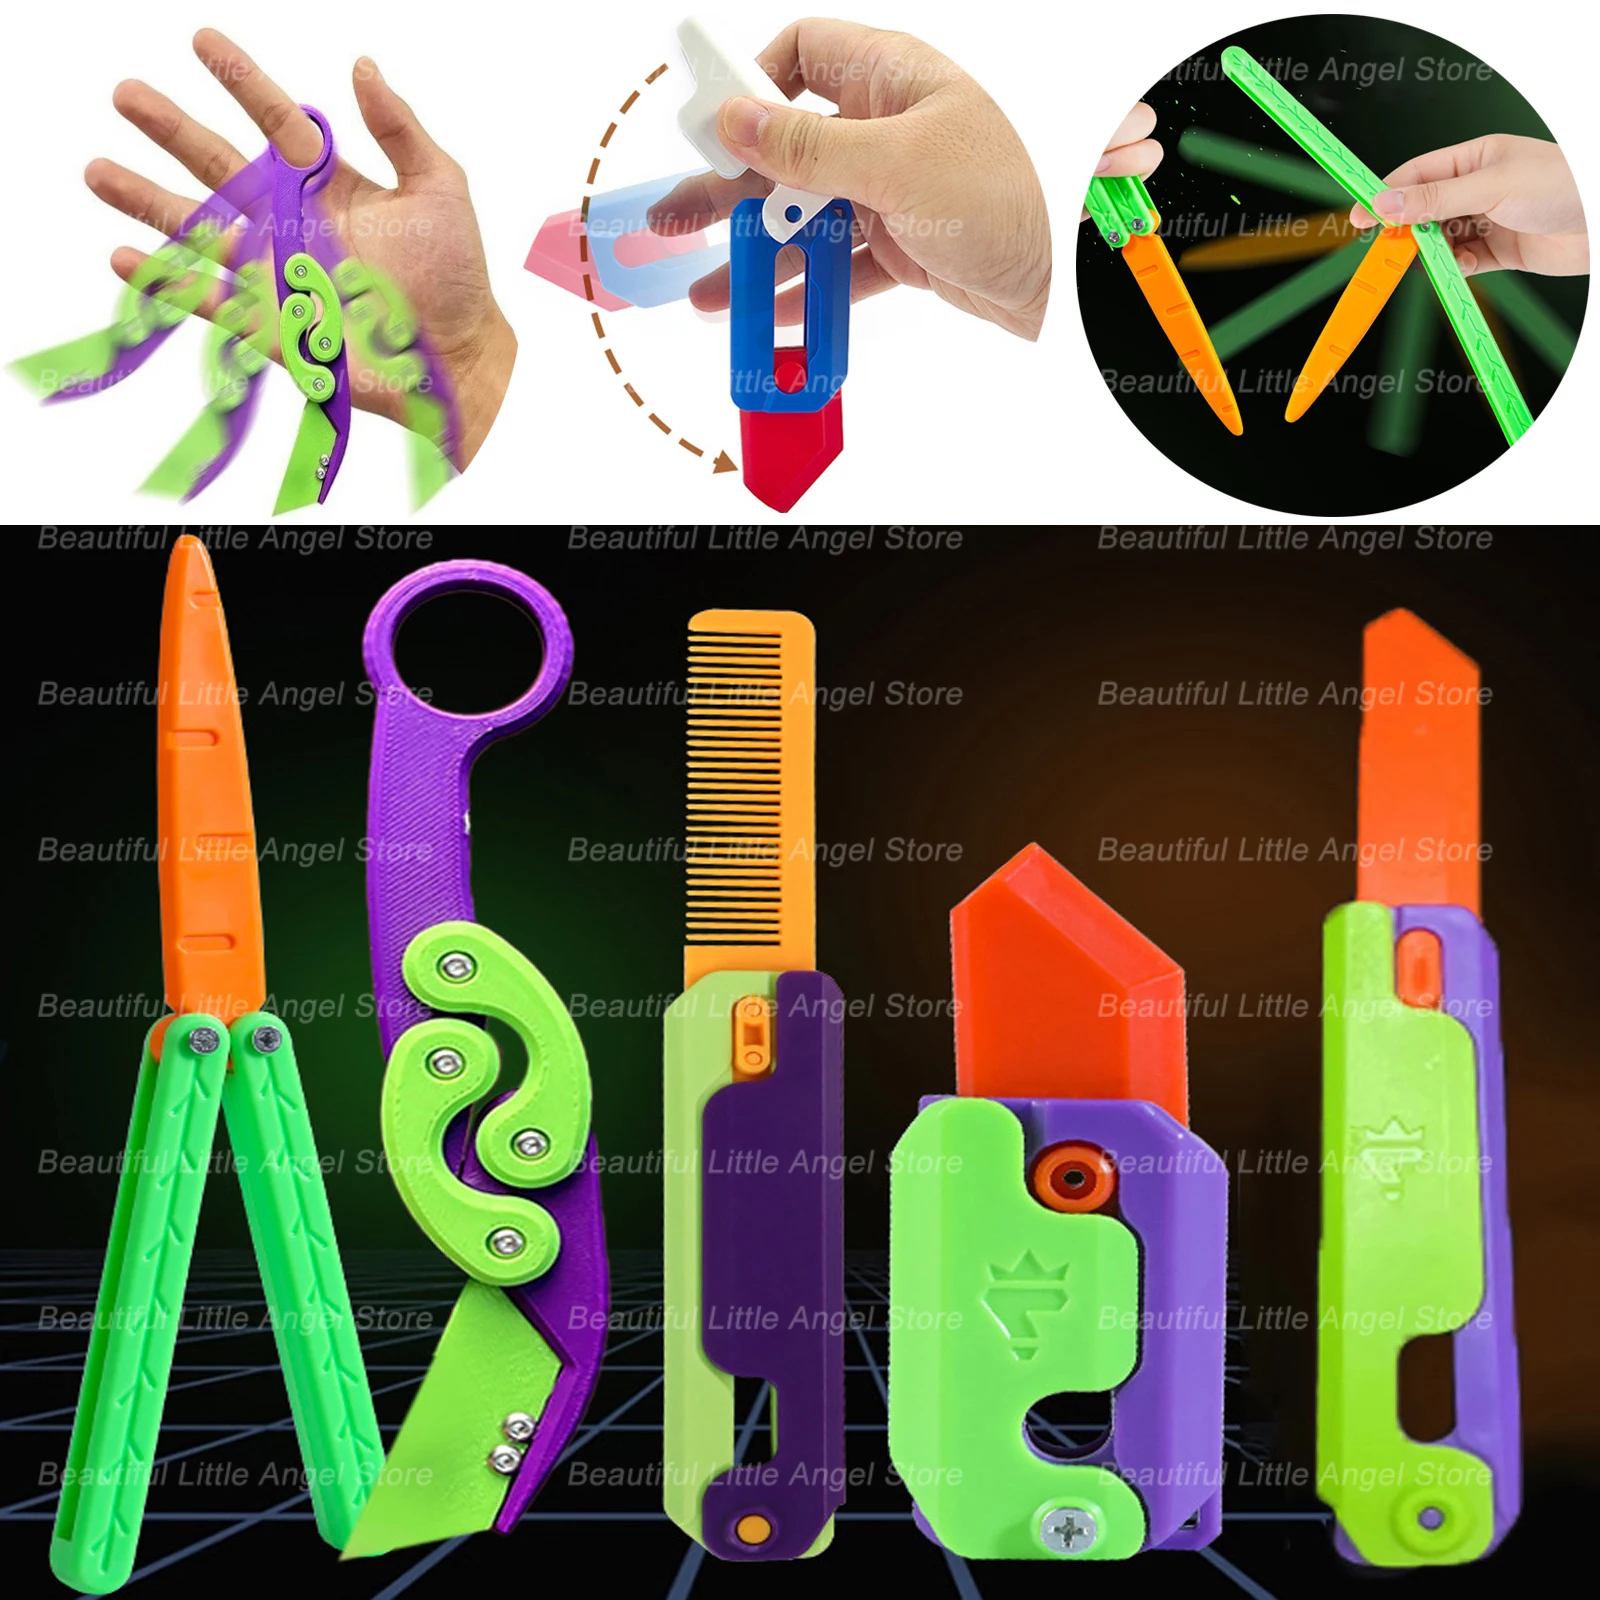 

New Knife Fidget Toy 3D Printing Technology Stocking Stuffers Gift With Butterfly Claw Blade Carrot Fidget Toy Stress relief Toy